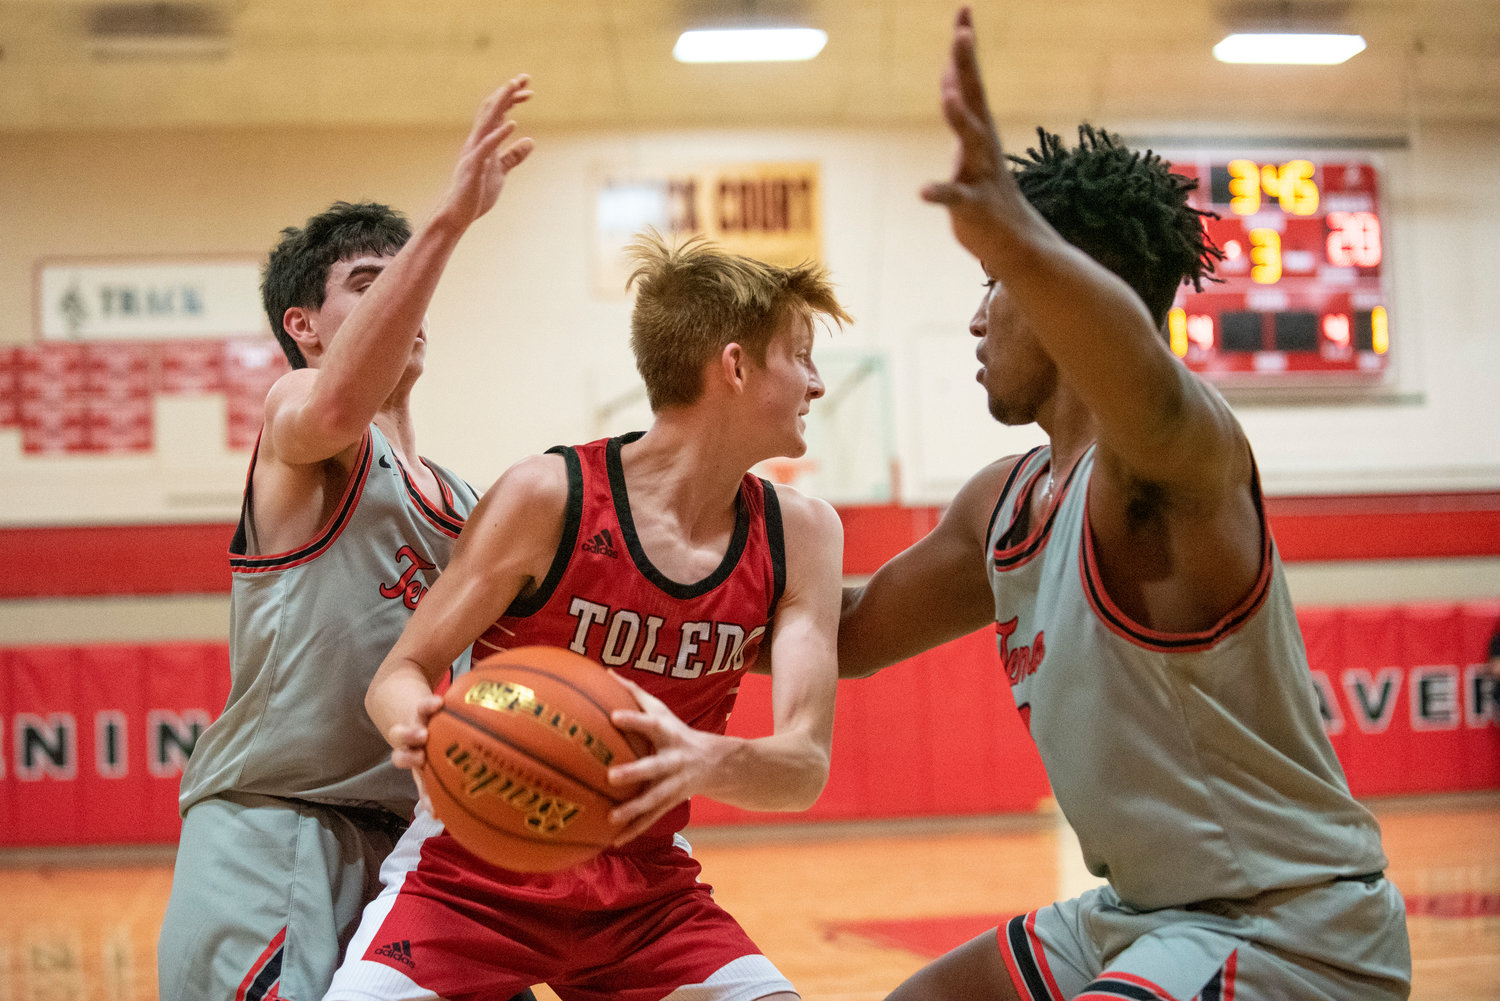 Toledos Jake Cournyer looks for an open pass against a trap by Tenino's Will Feltus, left, and Takari Hickle, right, on Dec. 22.